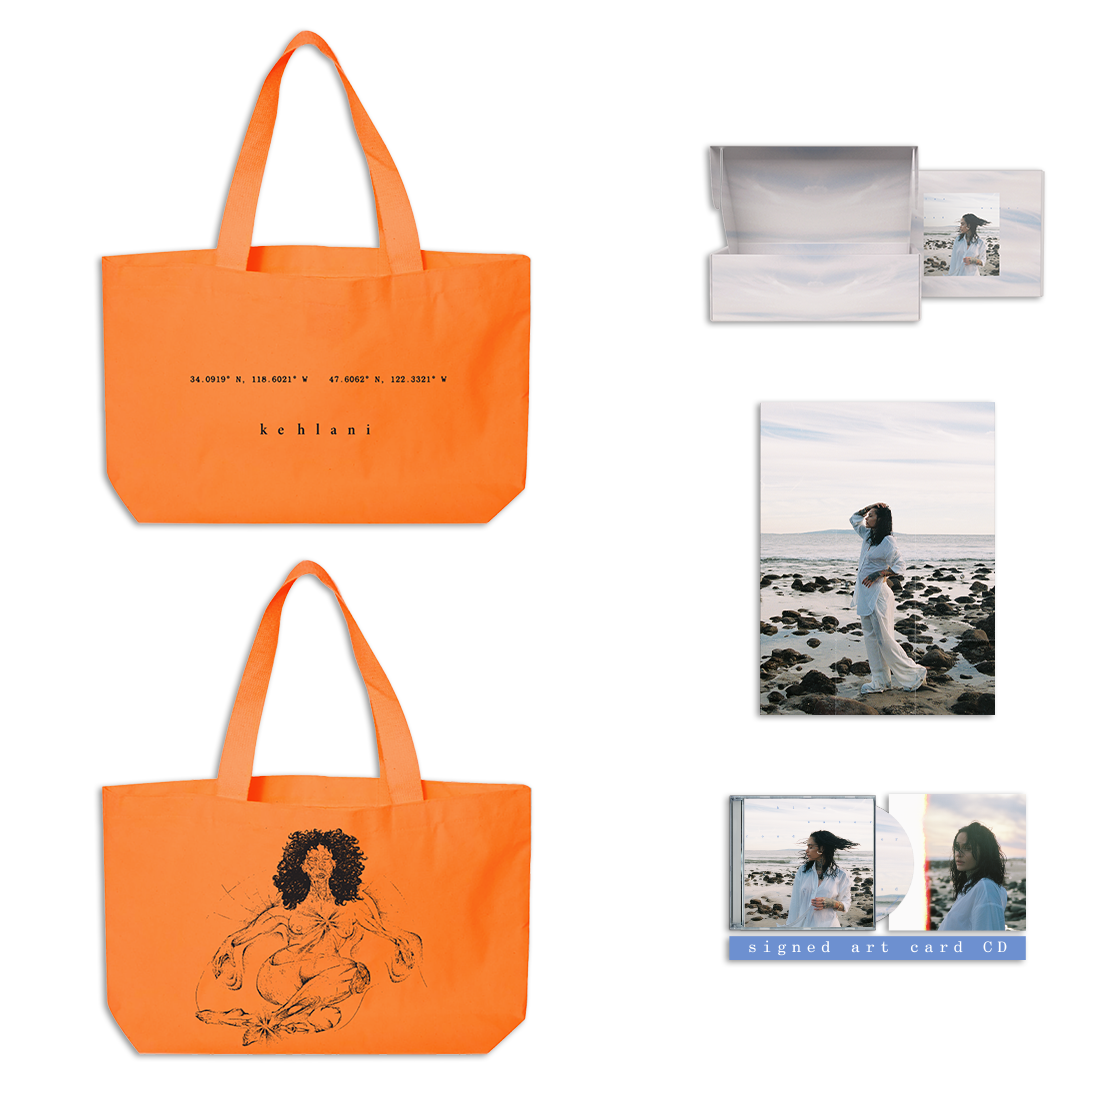 exclusive community tote + signed art card CD box set